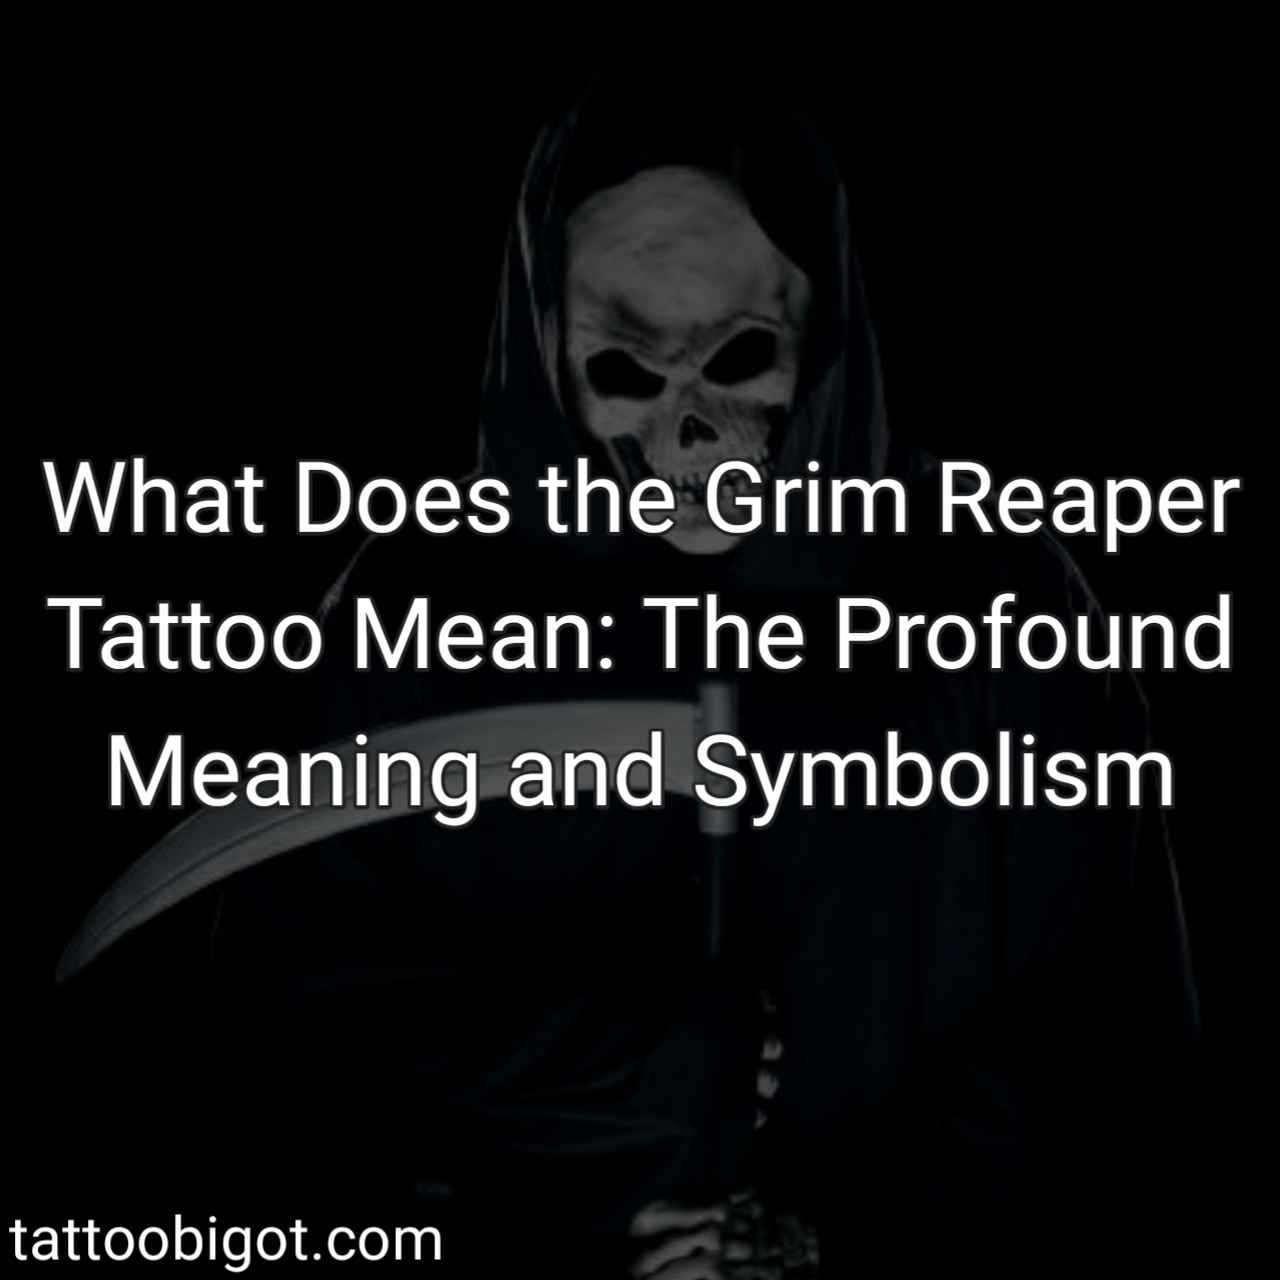 What does the grim reaper tattoo mean